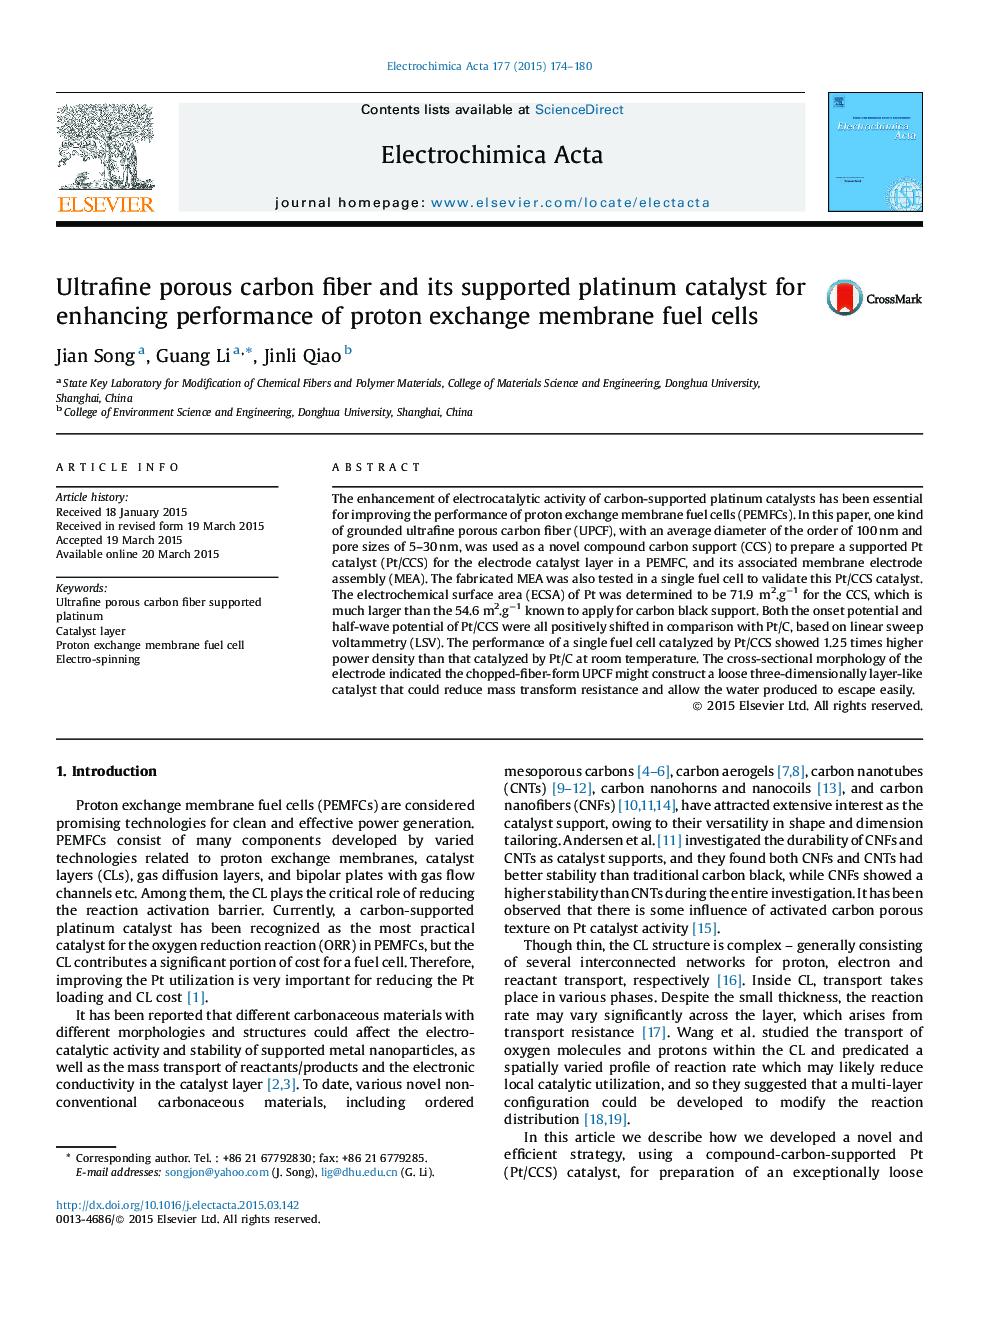 Ultrafine porous carbon fiber and its supported platinum catalyst for enhancing performance of proton exchange membrane fuel cells